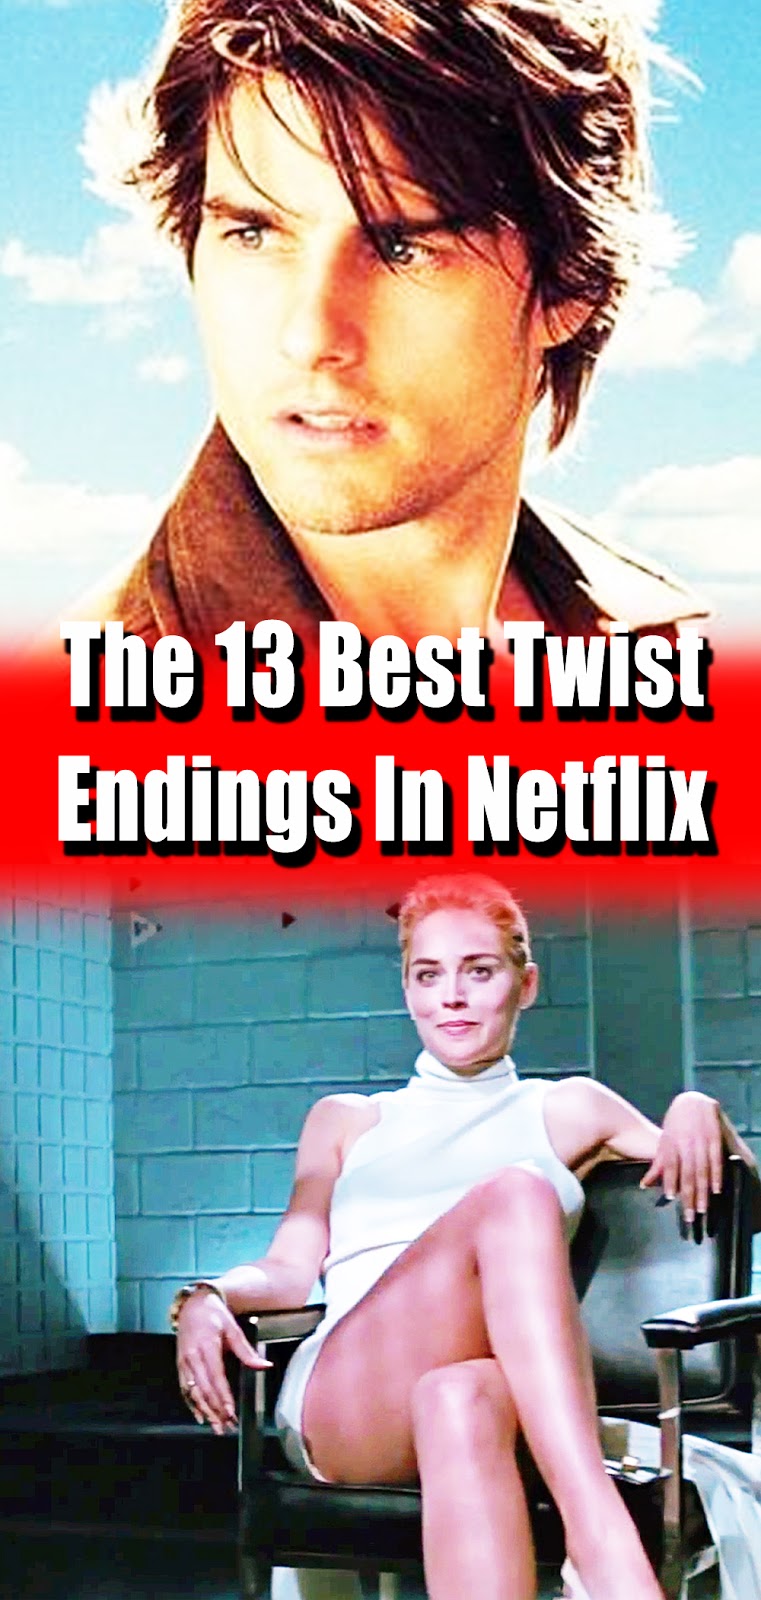 movies with twist endings netflix